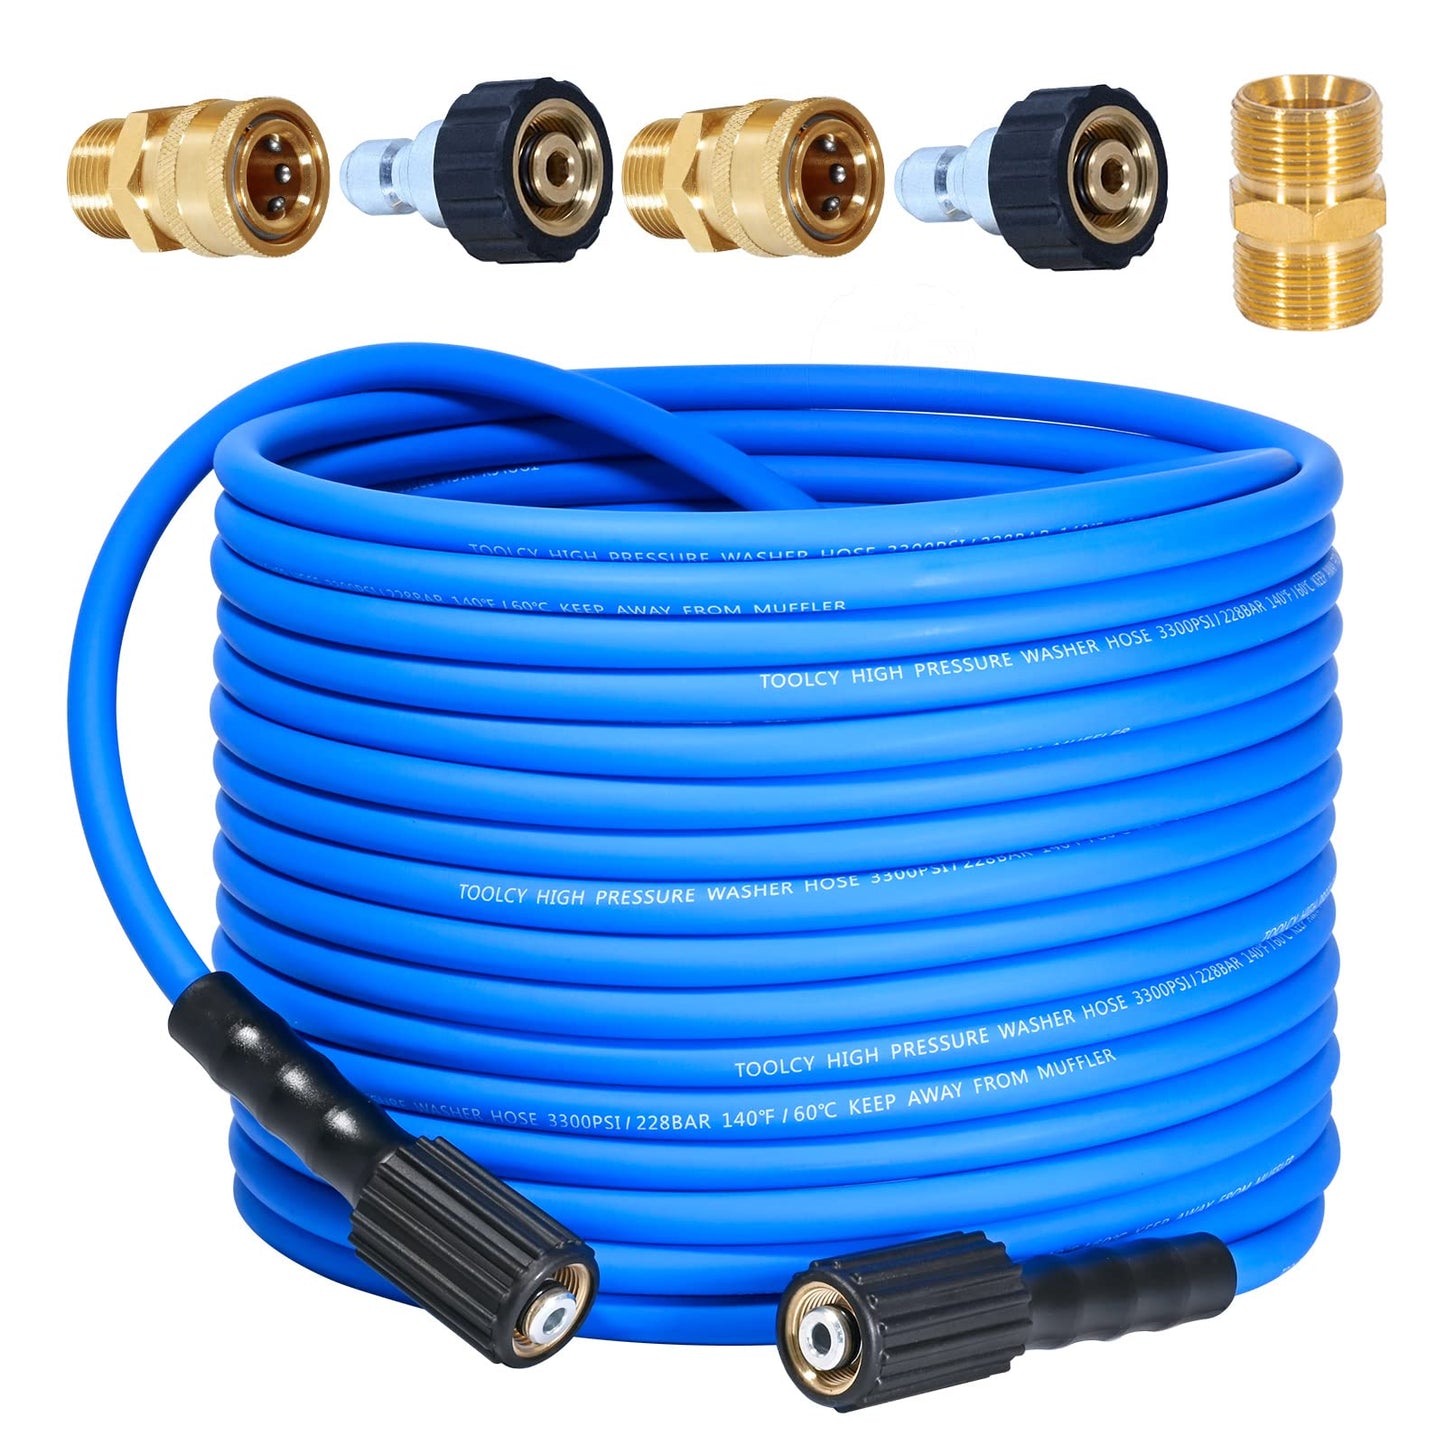 TOOLCY Pressure Washer Hose 50ft, 3300 PSI Kink Resistant Power Washer Hose 1/4 in., Replacement Power Wash Hose with M22 and 3/8" Quick Connection Kit for Gas & Electric